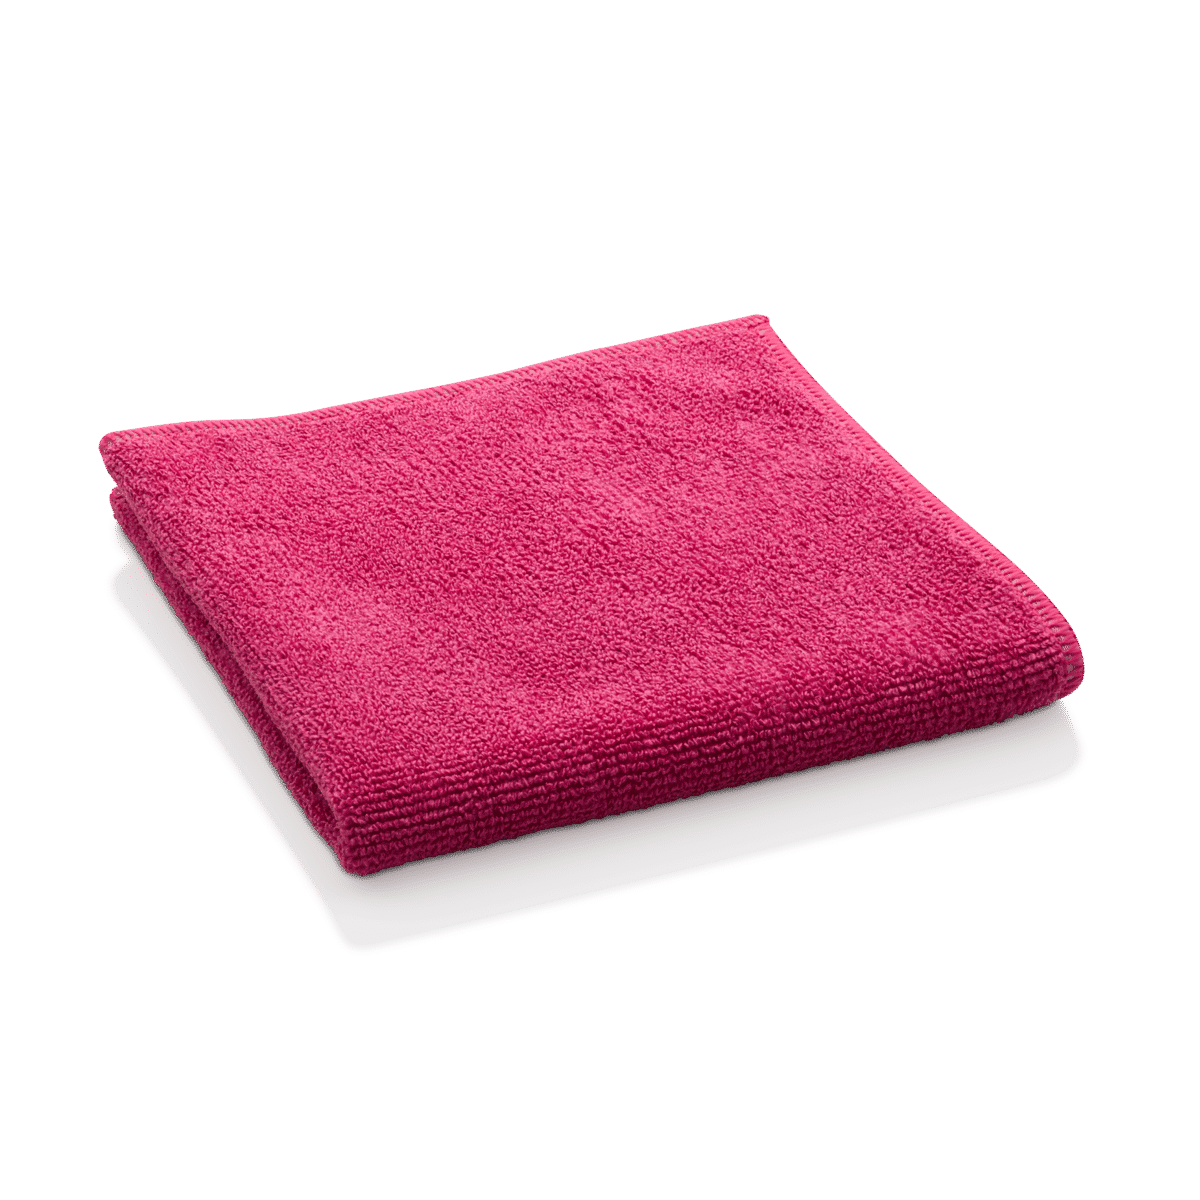 https://gimmethegoodstuff.org/wp-content/uploads/E-Cloth-General-Purpose-Cloth-Pink-from-Gimme-the-Good-Stuff-2.png